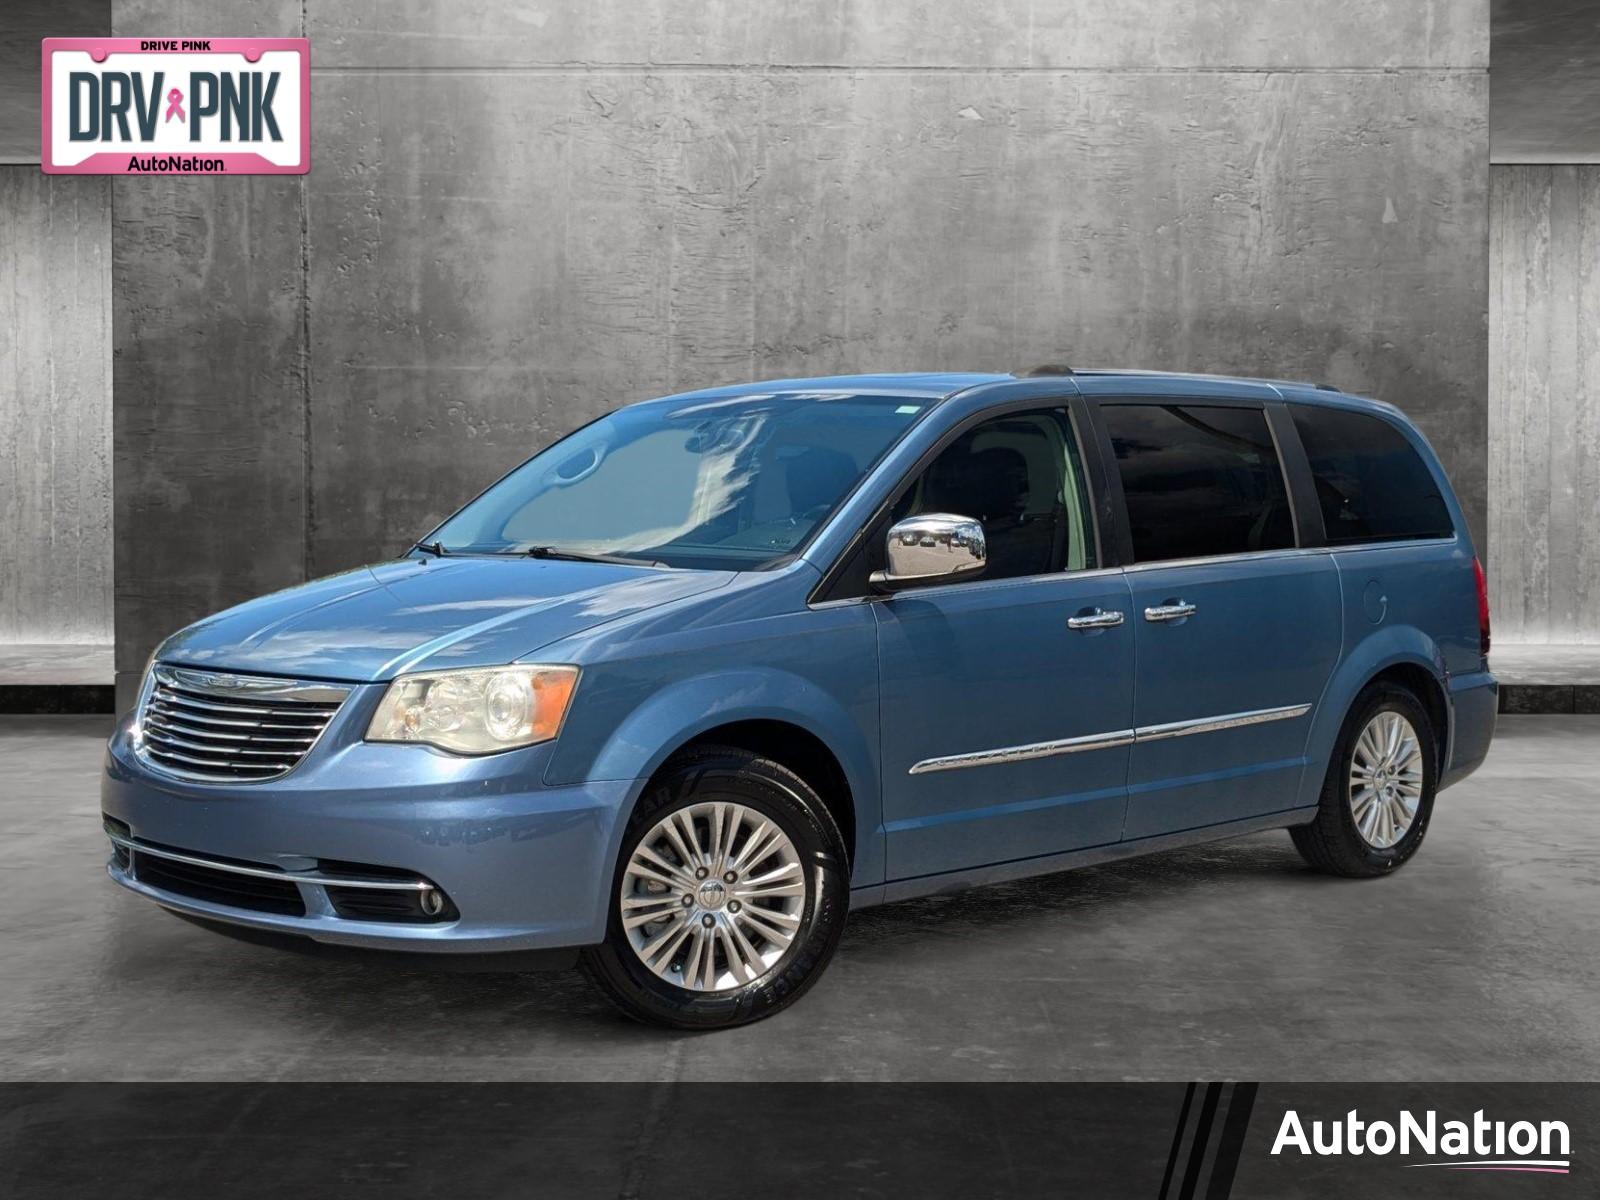 2012 Chrysler Town & Country Vehicle Photo in St. Petersburg, FL 33713